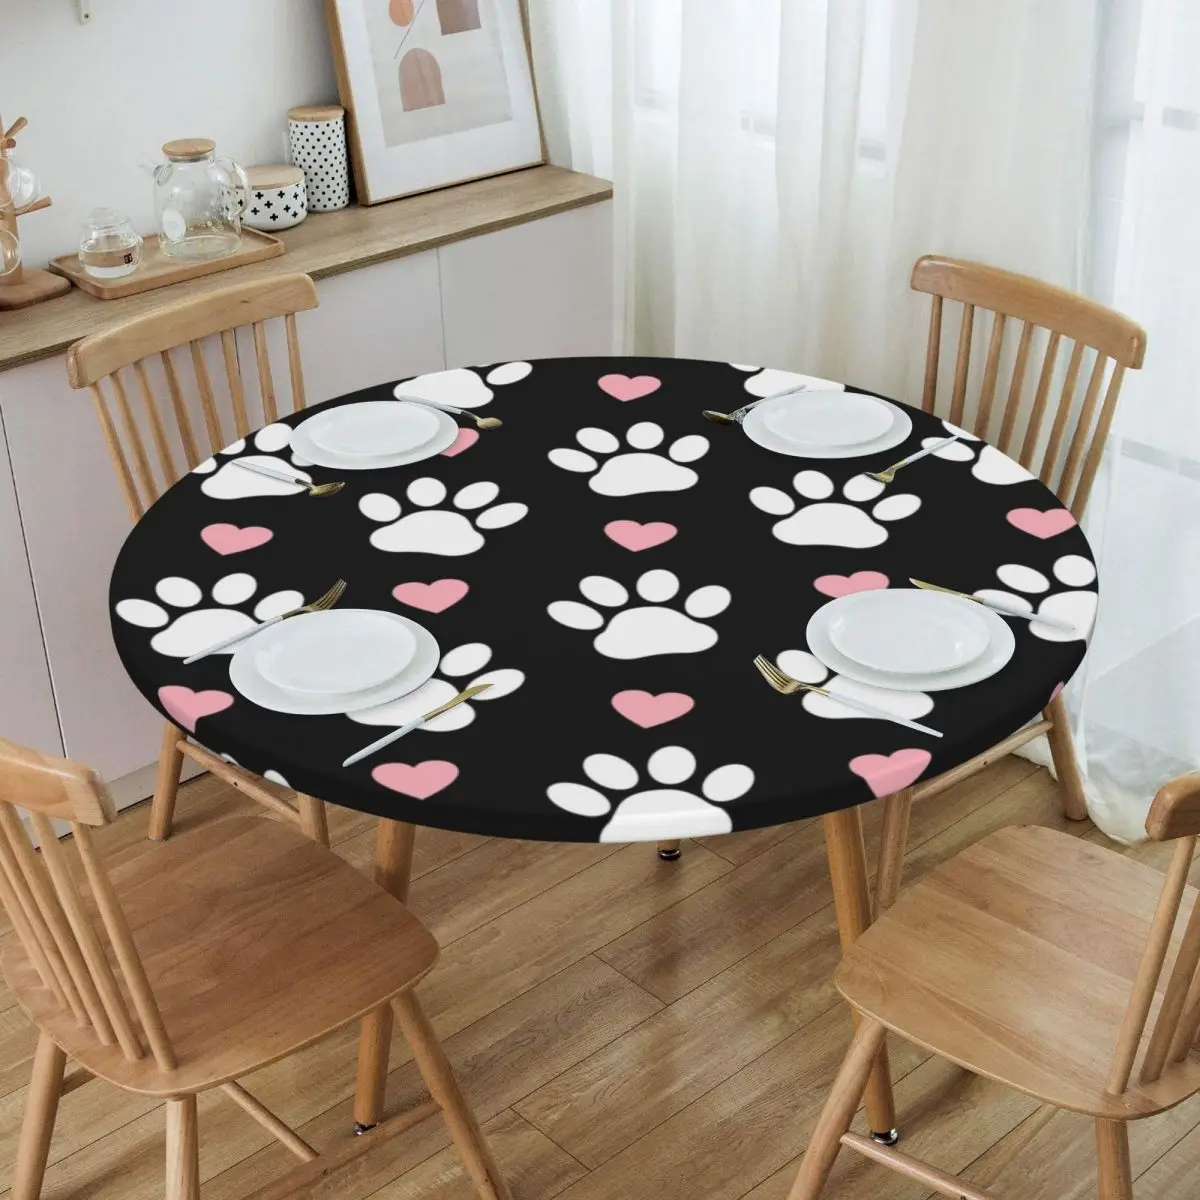 

Pattern Of Paws White Dog Paw Paw Tablecloth Elastic Fitted Oilproof Pretty Pink Hearts Puppy Table Cloth Cover for Dining Room